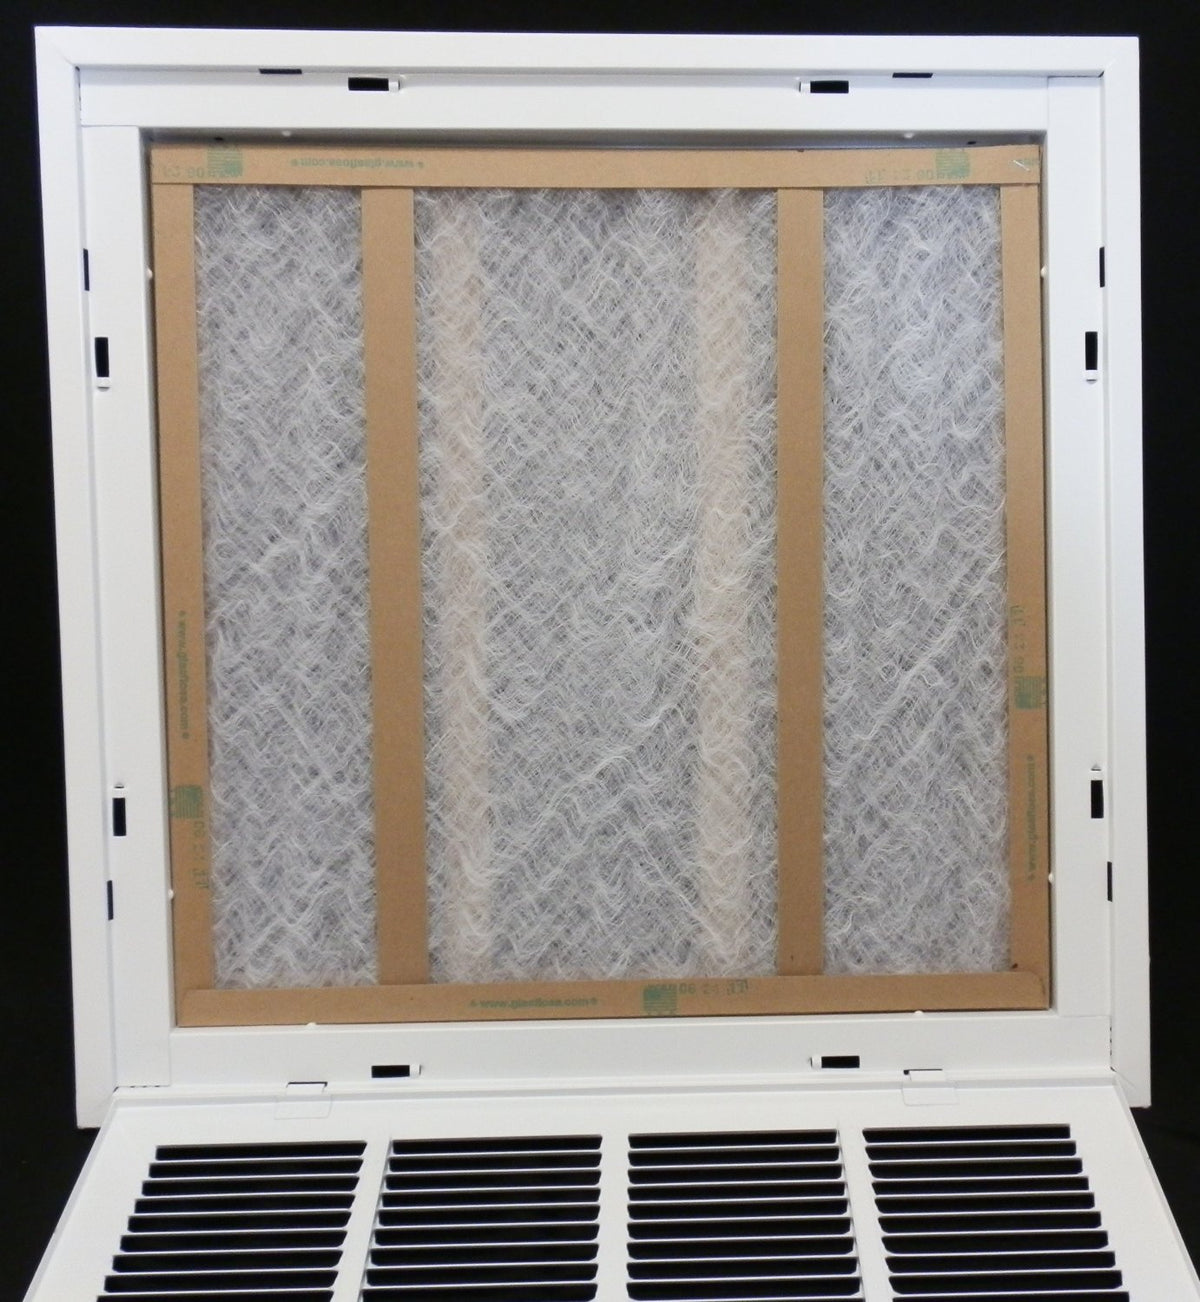 20&quot; X 16&quot; Steel Return Air Filter Grille for 1&quot; Filter - Removable Frame - [Outer Dimensions: 22 5/8&quot; X 18 5/8&quot;]